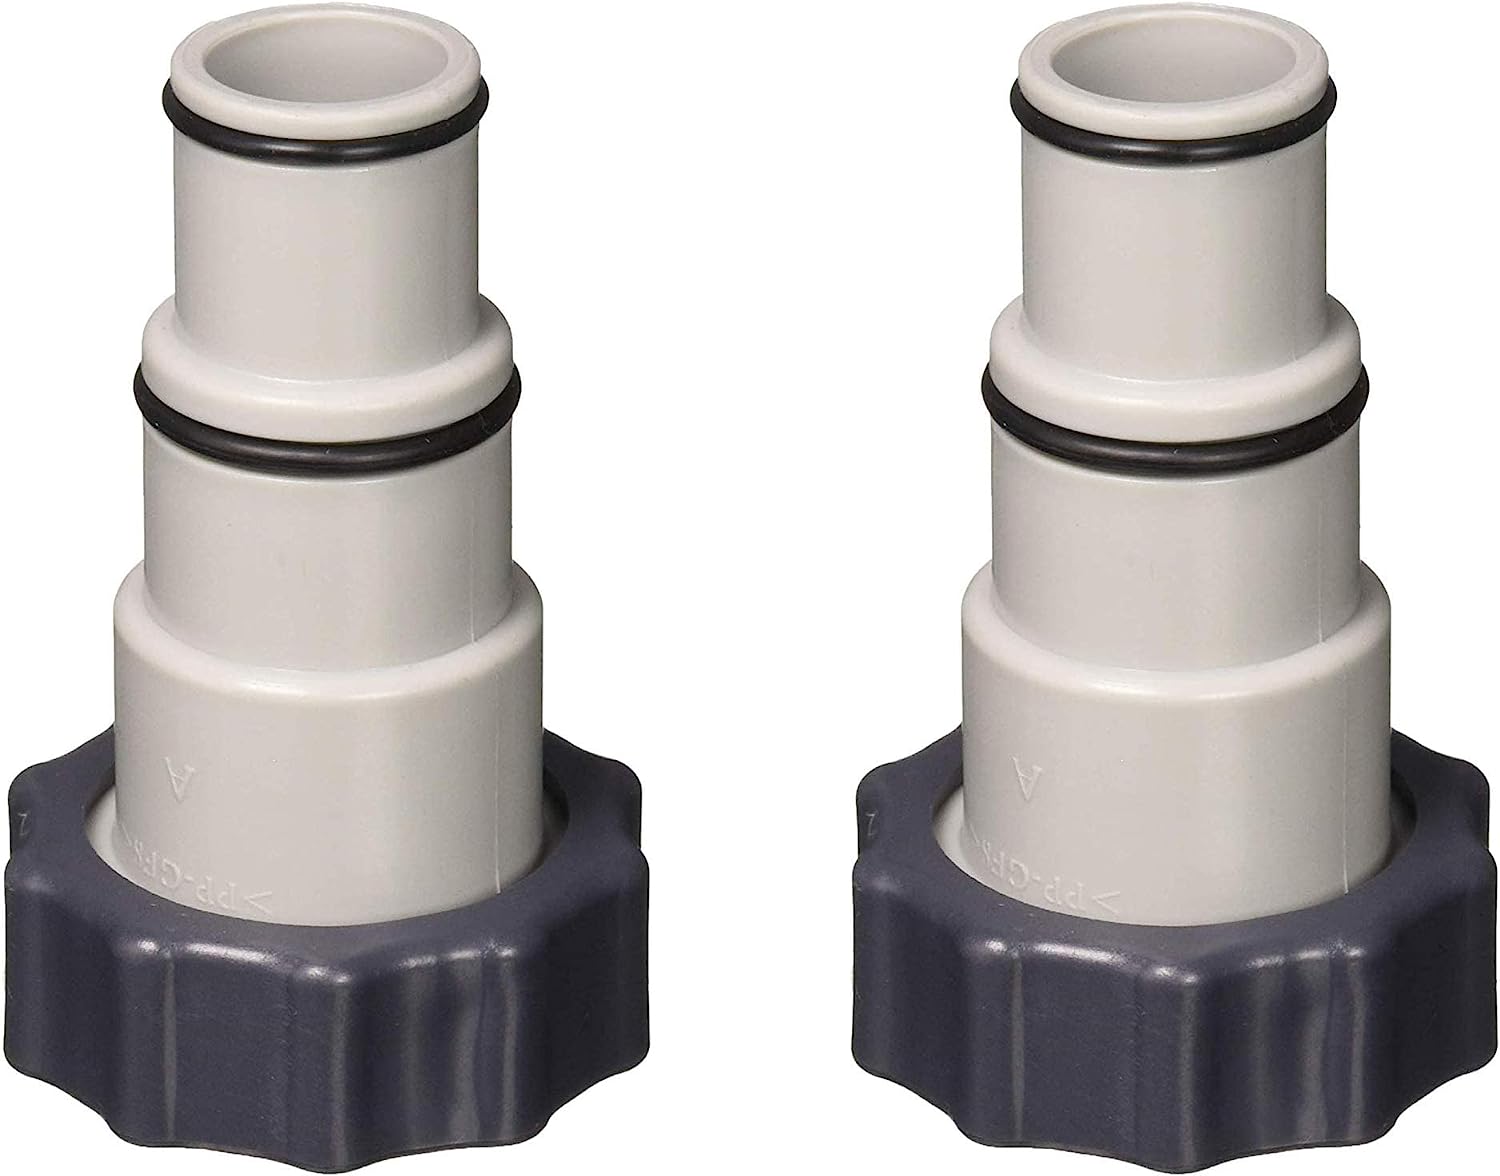 Replacement Hose Adapter A w/Collar for Threaded Connection Pumps (Pair)